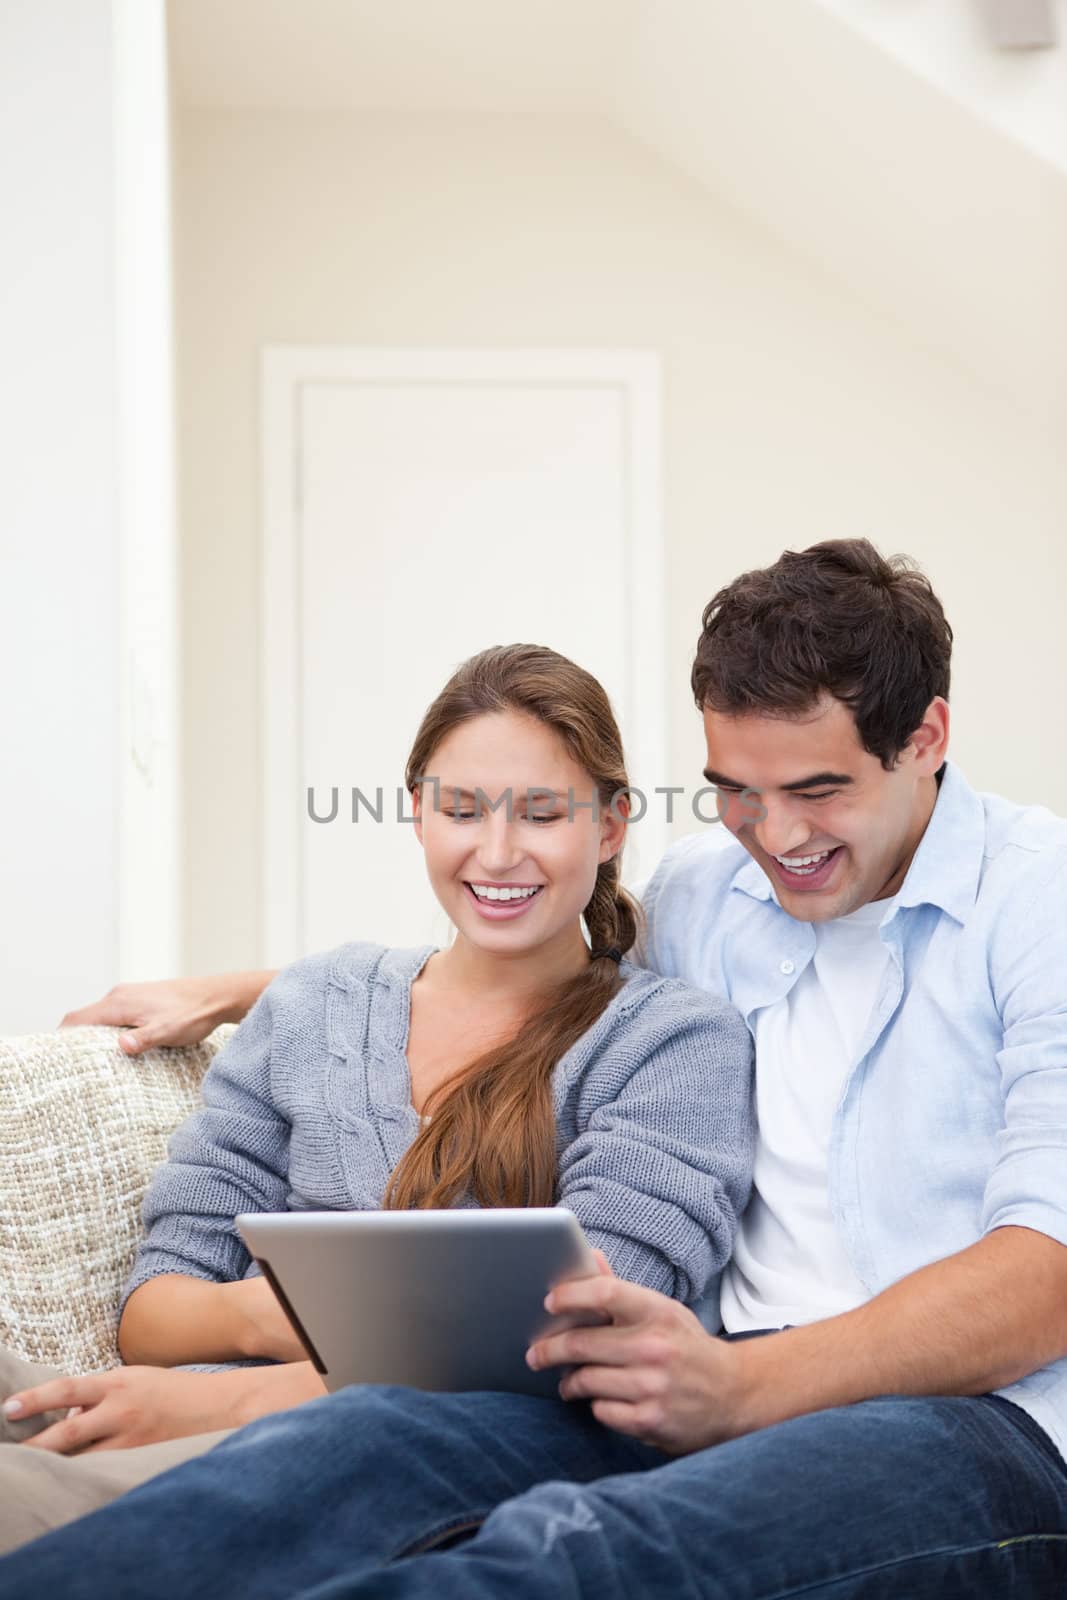 Couple laughing while holding a laptop in a sitting room